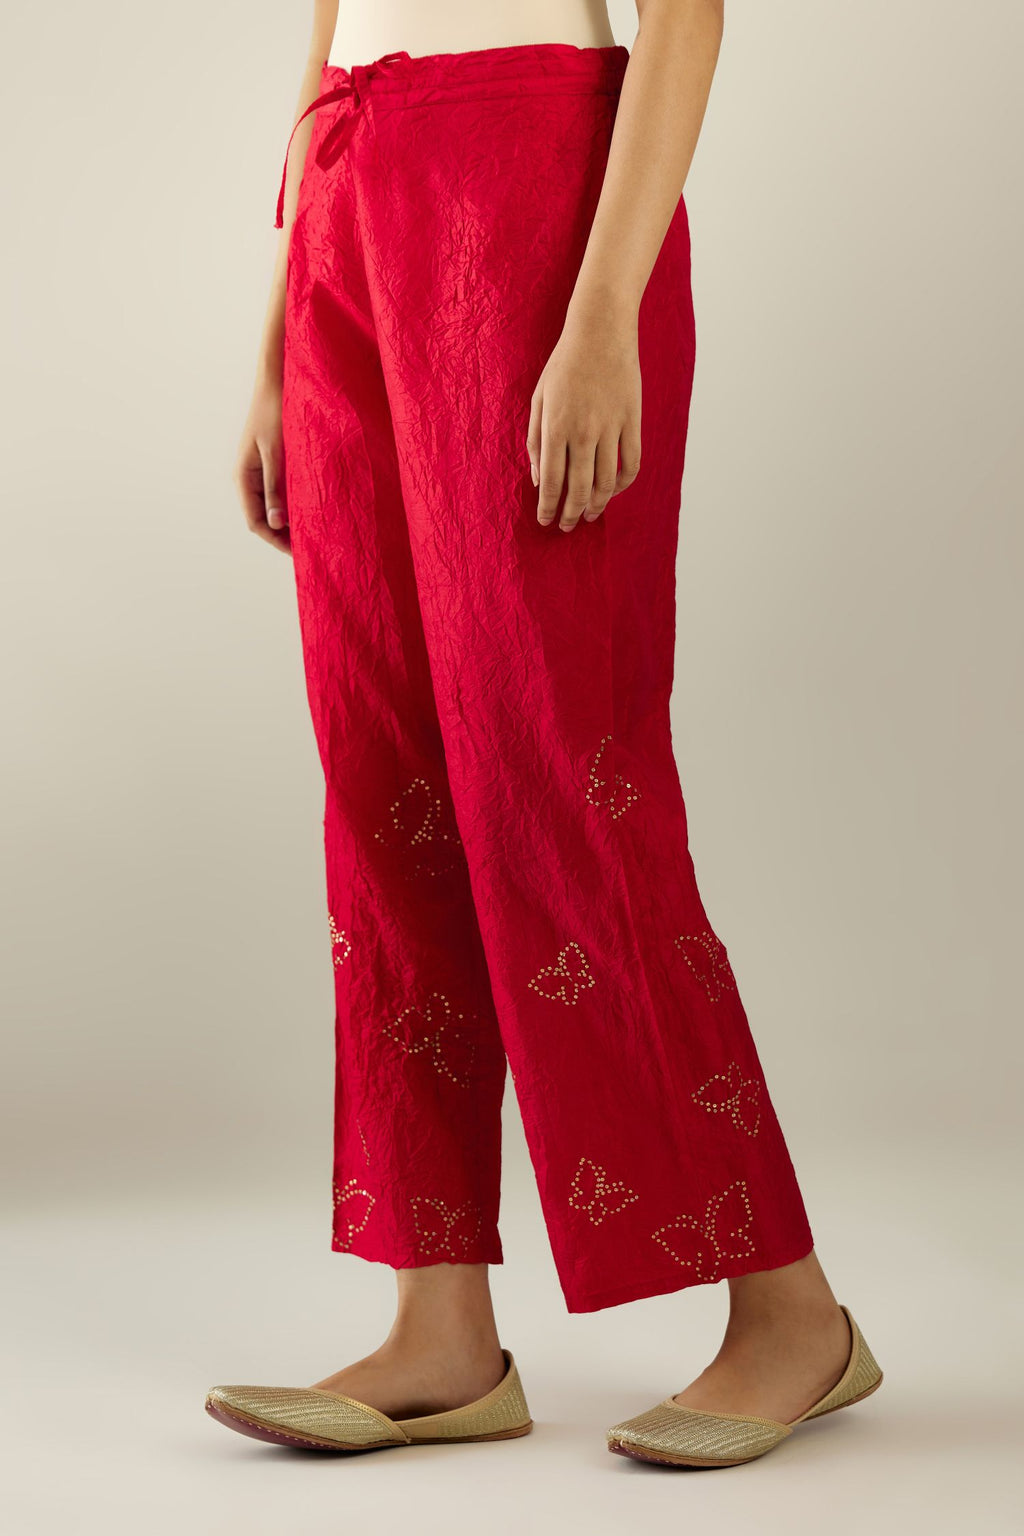 Red silk pants with side pockets and assorted sequined butterflies till mid-calf length.